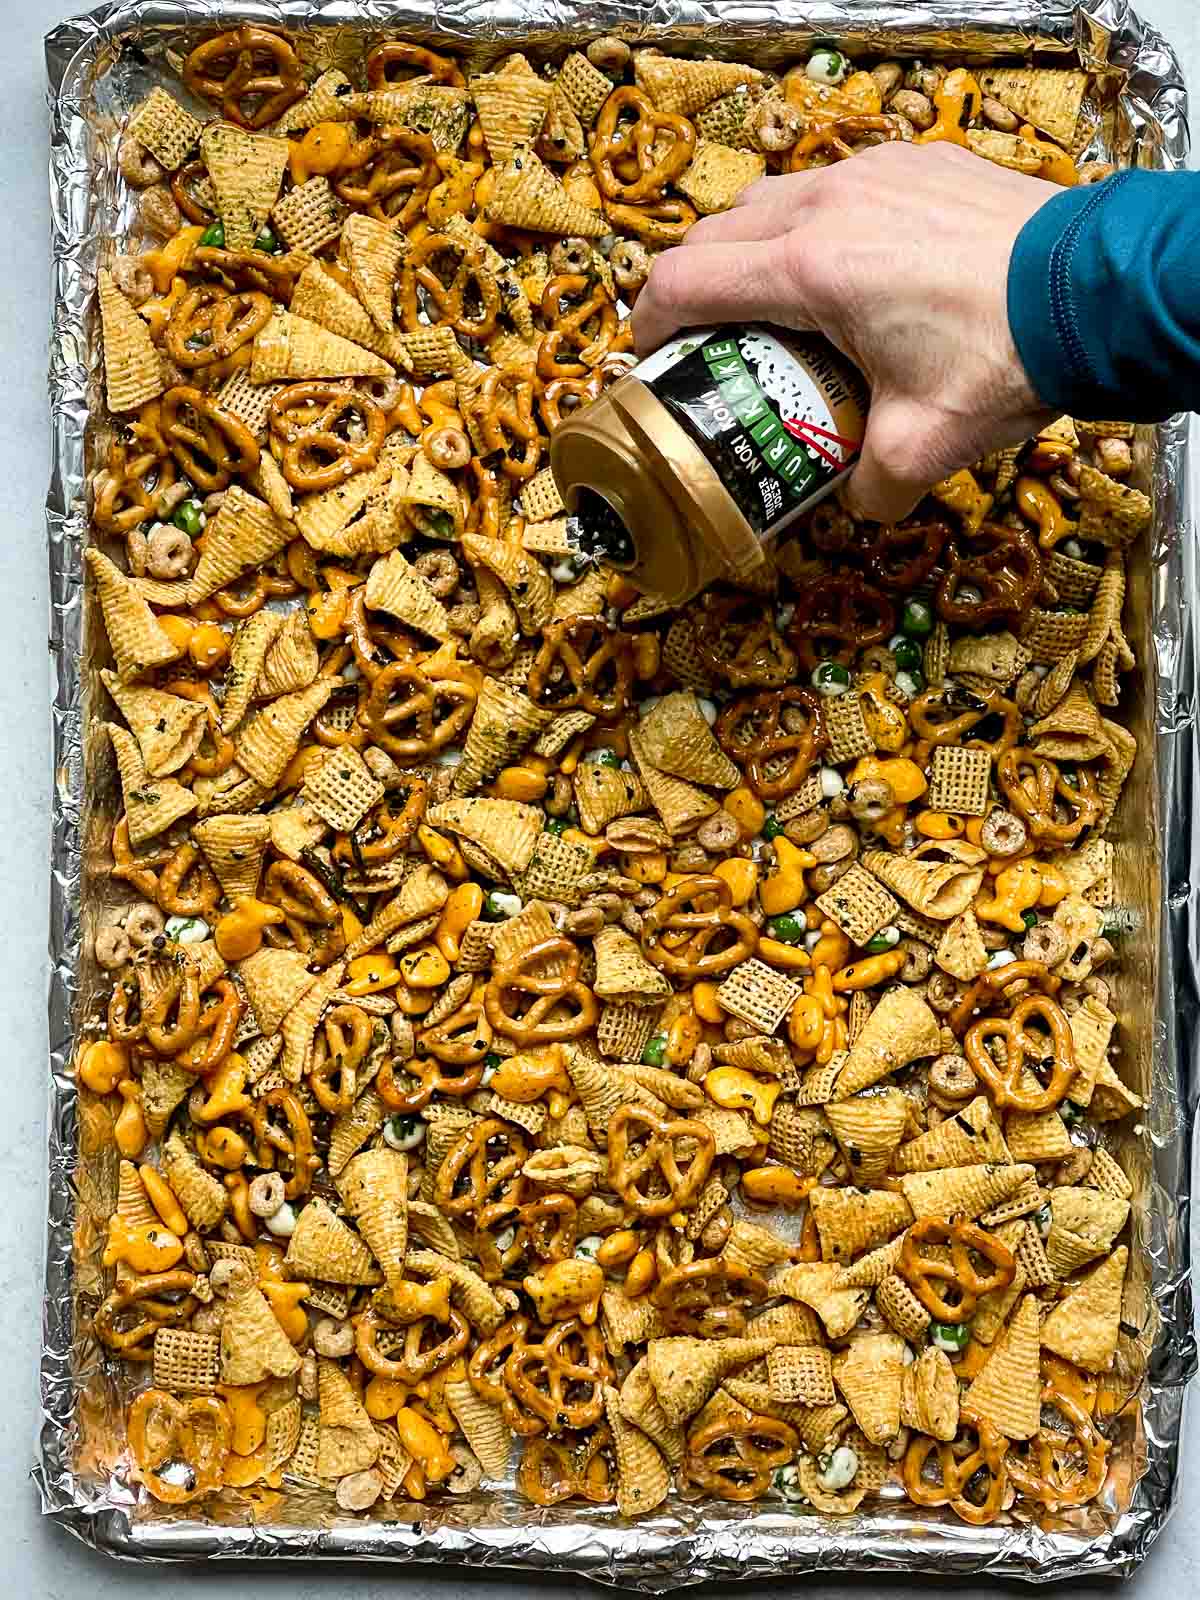 A baking tray lined with Furikake Chex Mix with a hand adding the Furikake seasoning.